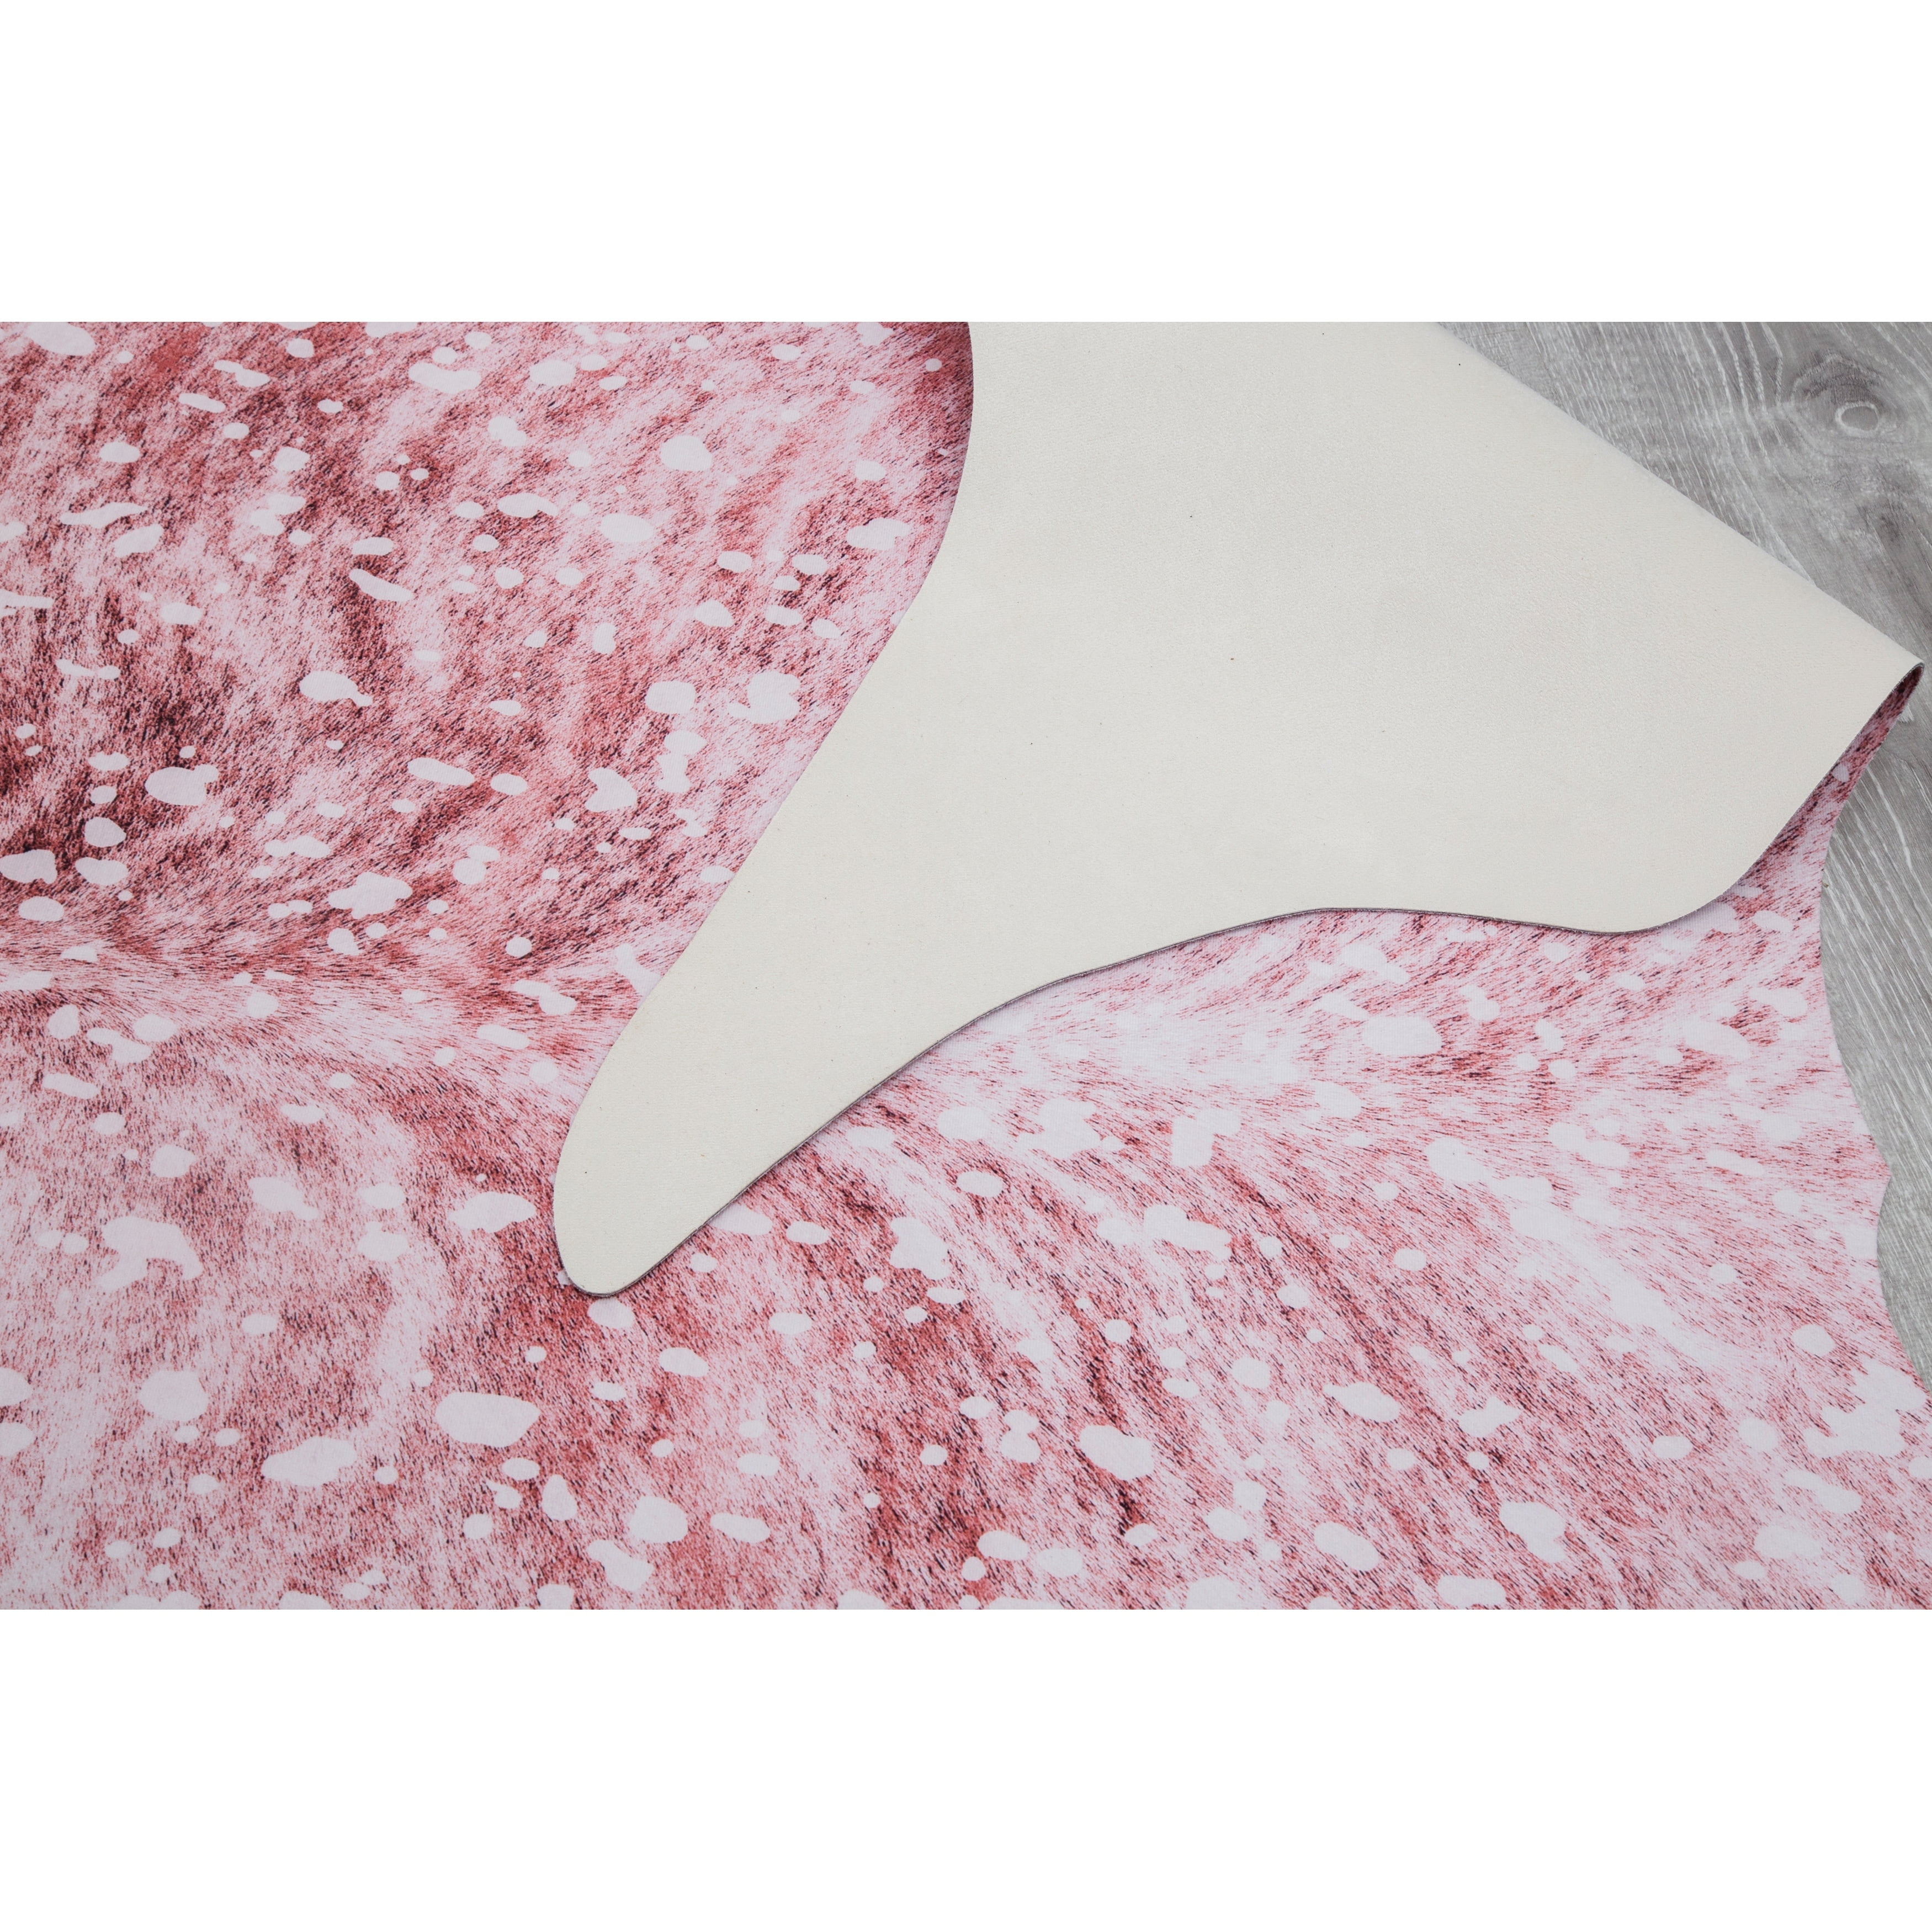 MDA Home Asimi 6'2x8' Transitional Faux Cowhide Fabric Area